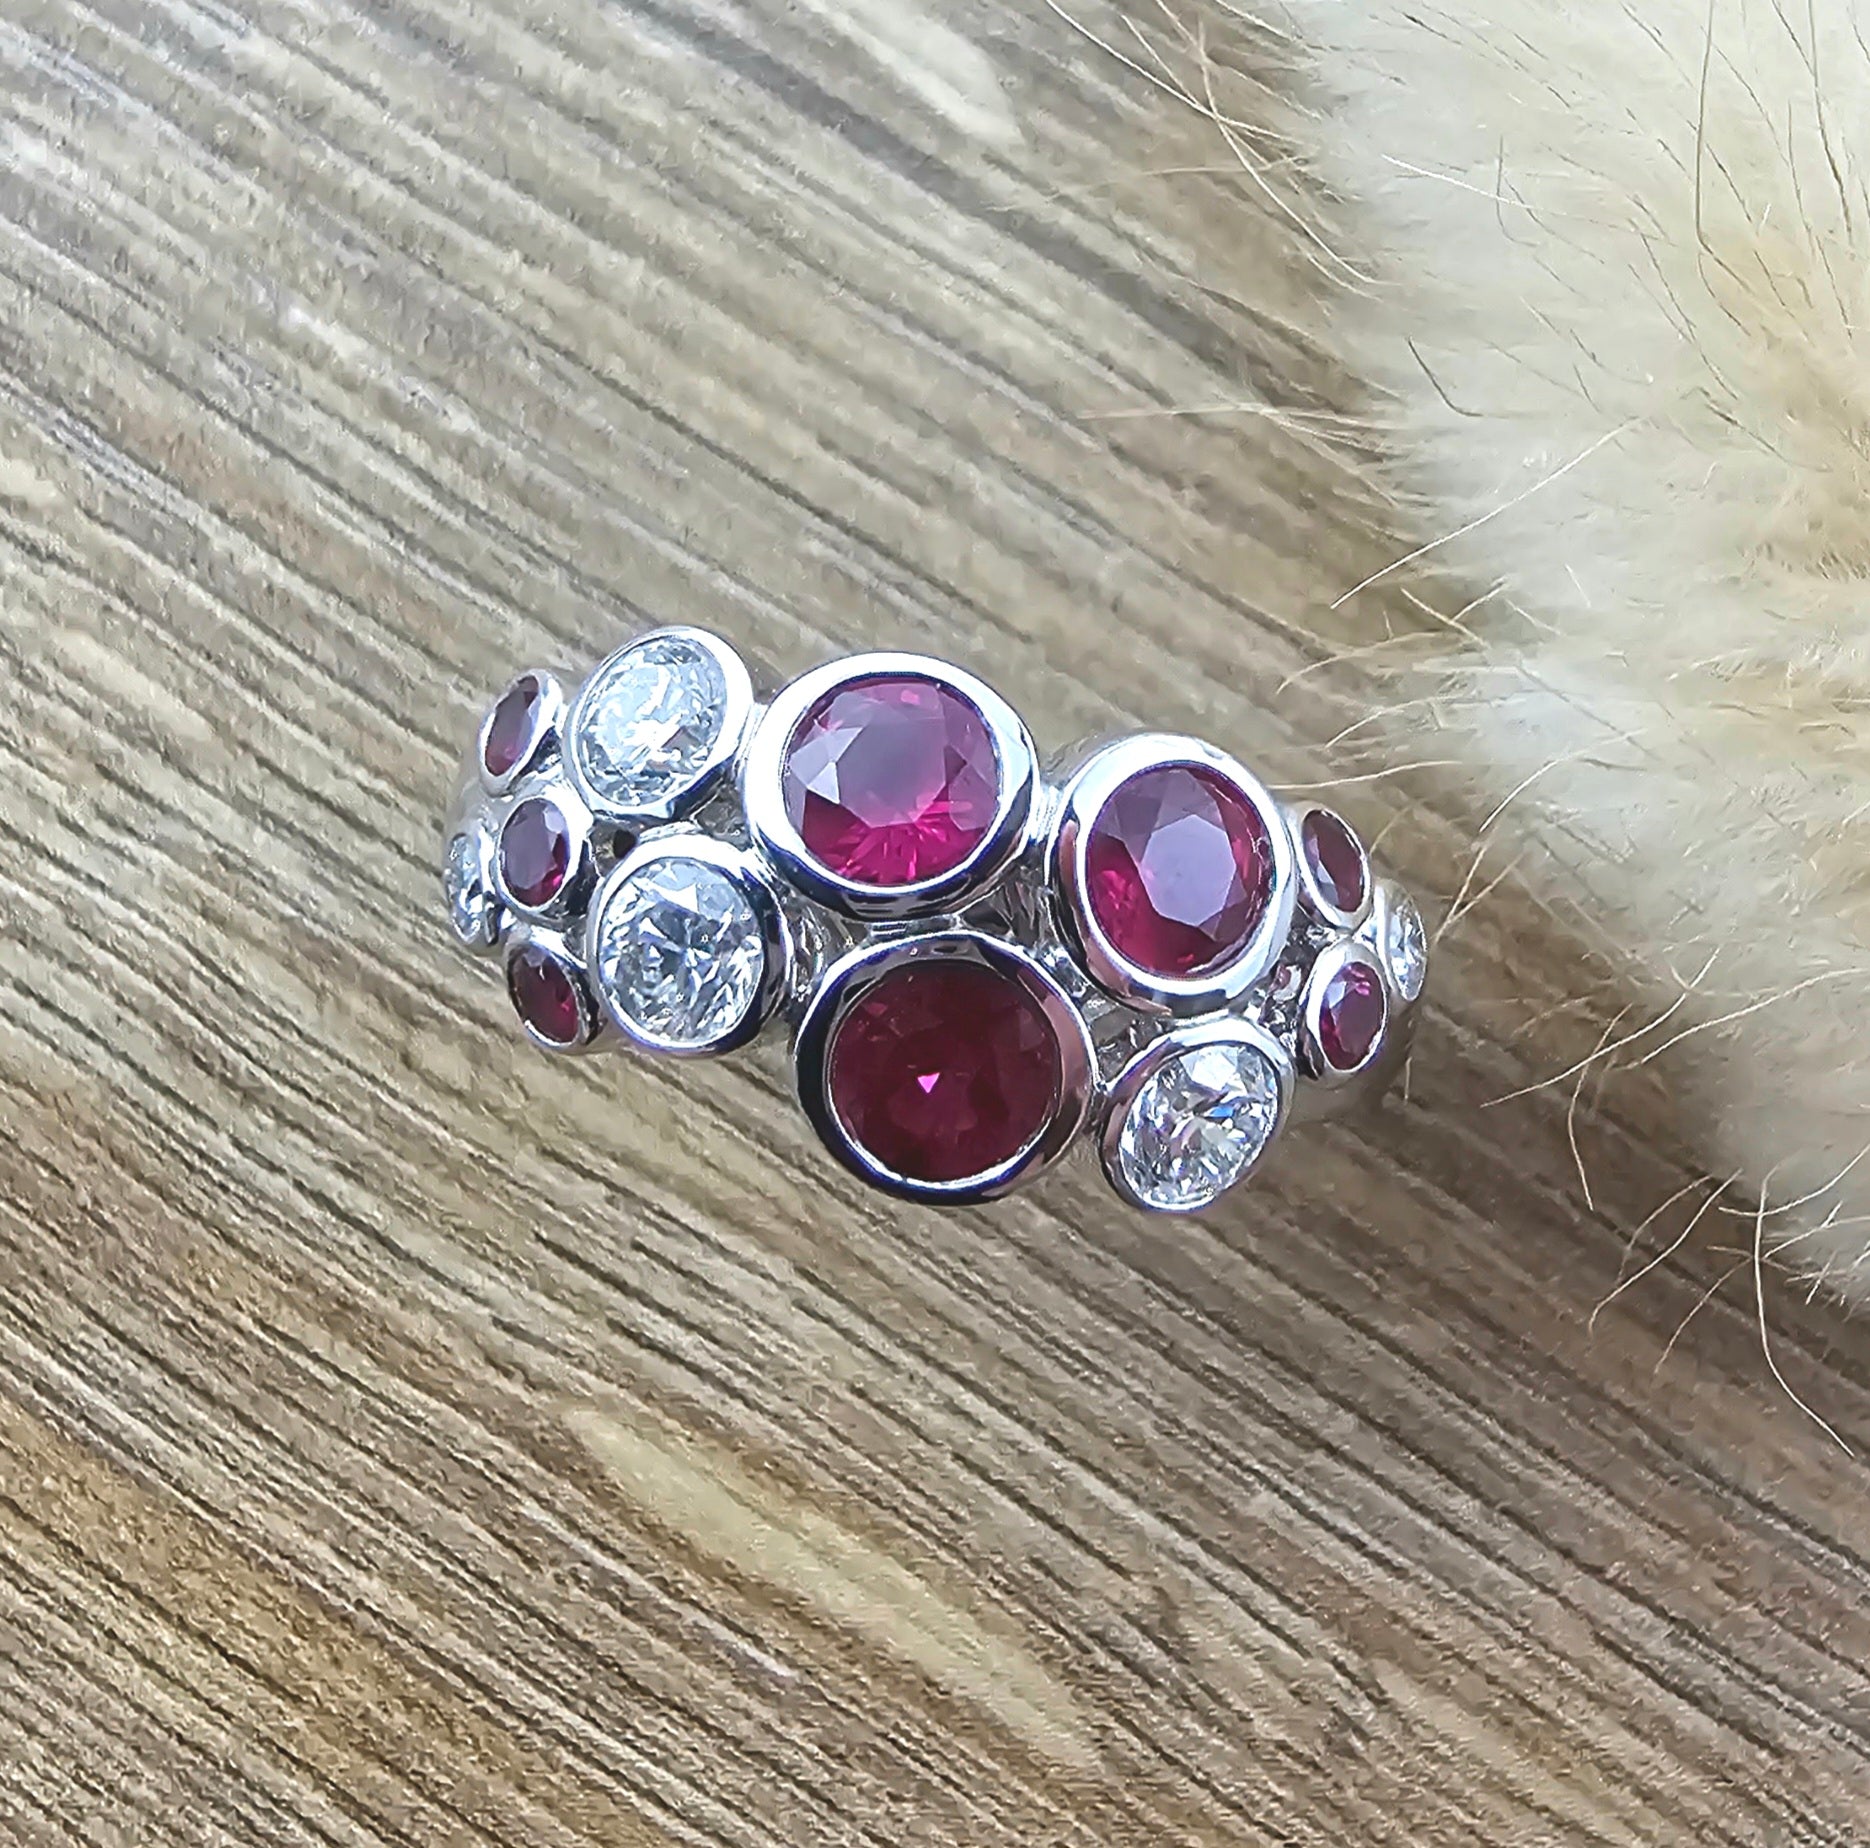 Large ruby and diamond bubble ring